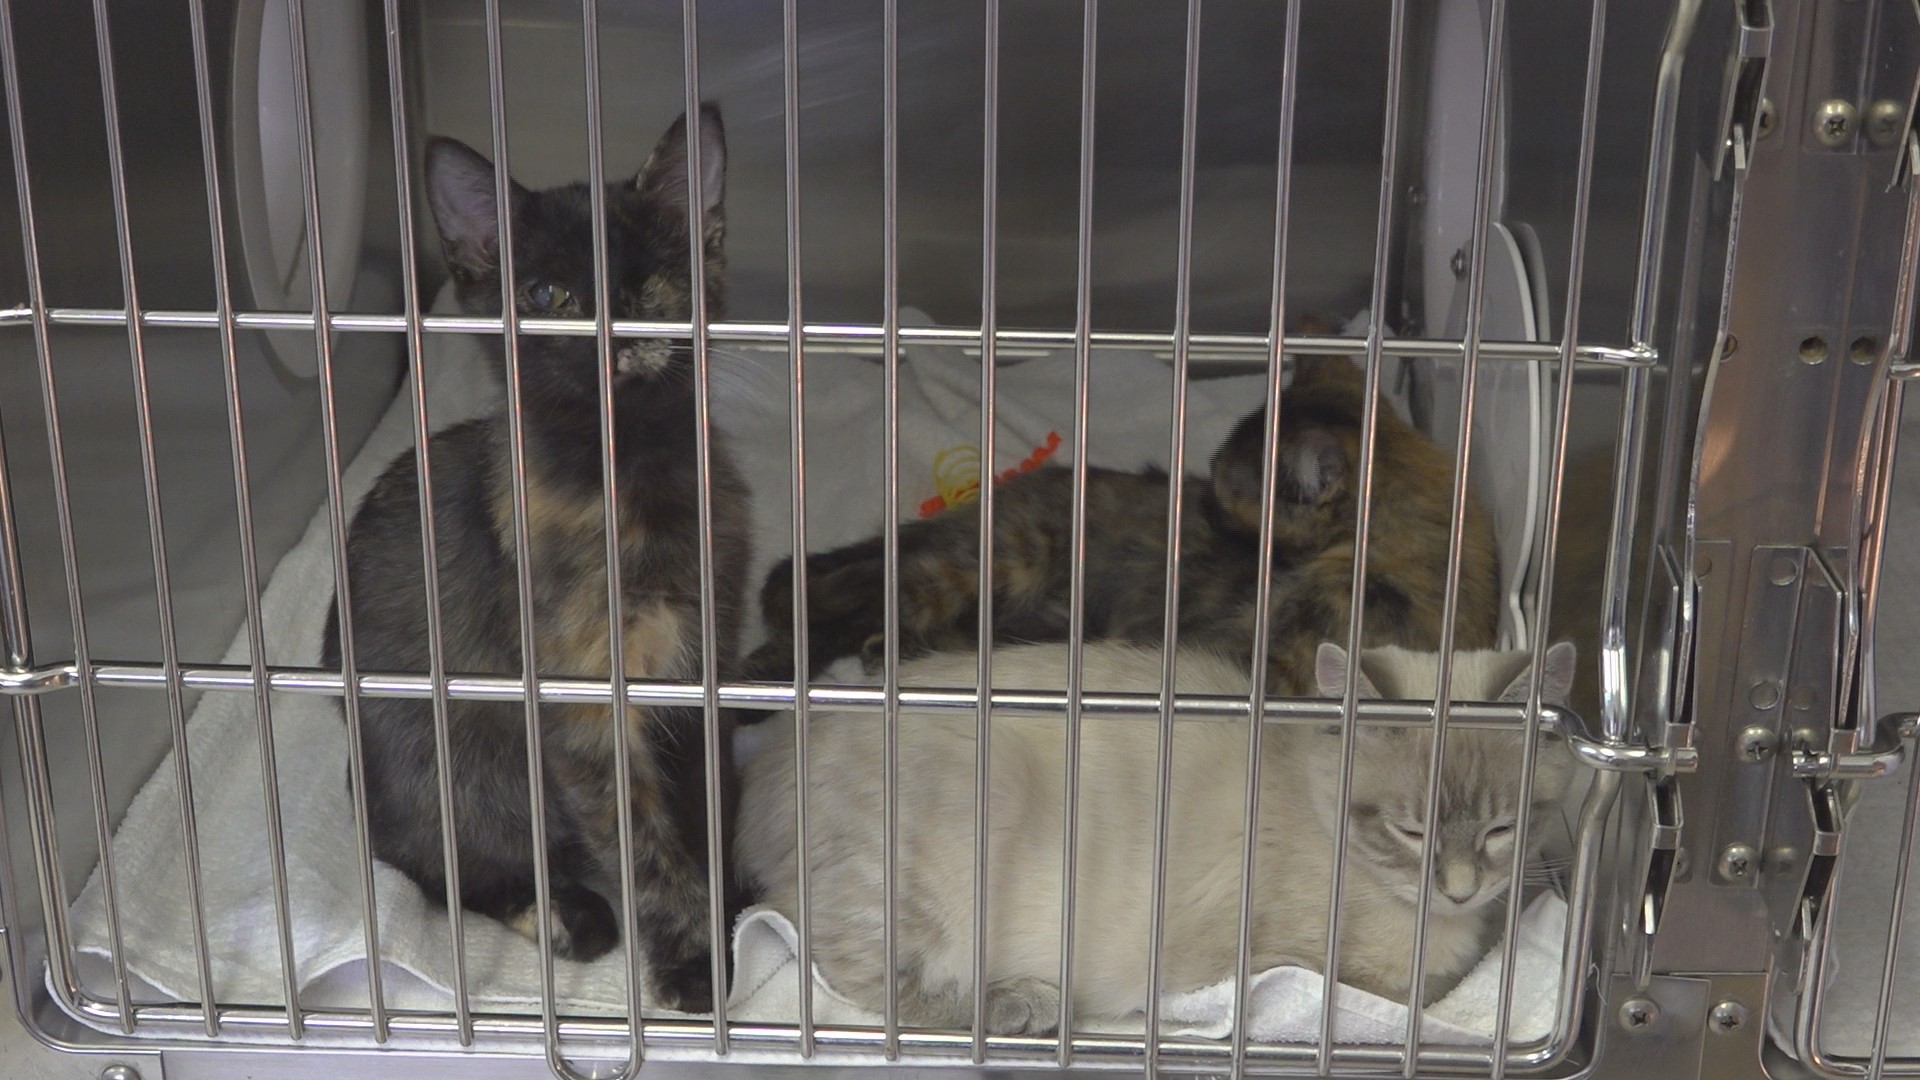 Several of the cats that were rescued had severe upper respiratory infections and ear infections.